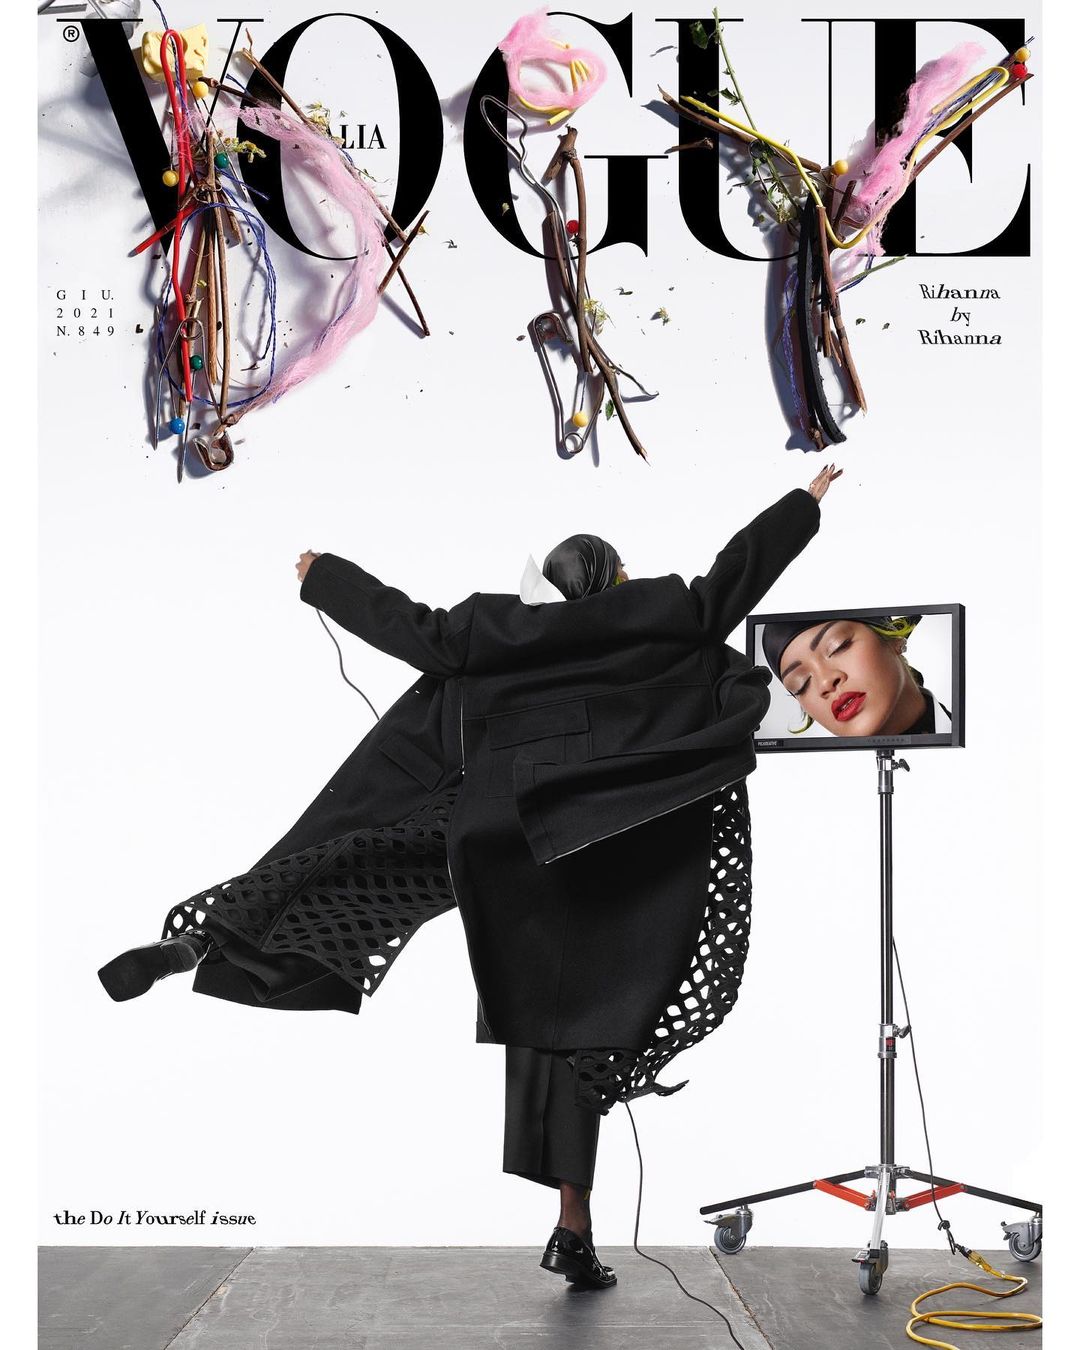 Pics| Rihanna styles herself for the cover of Vogue Italia’s ‘Do It Yourself’ issue, EntertainmentSA News South Africa